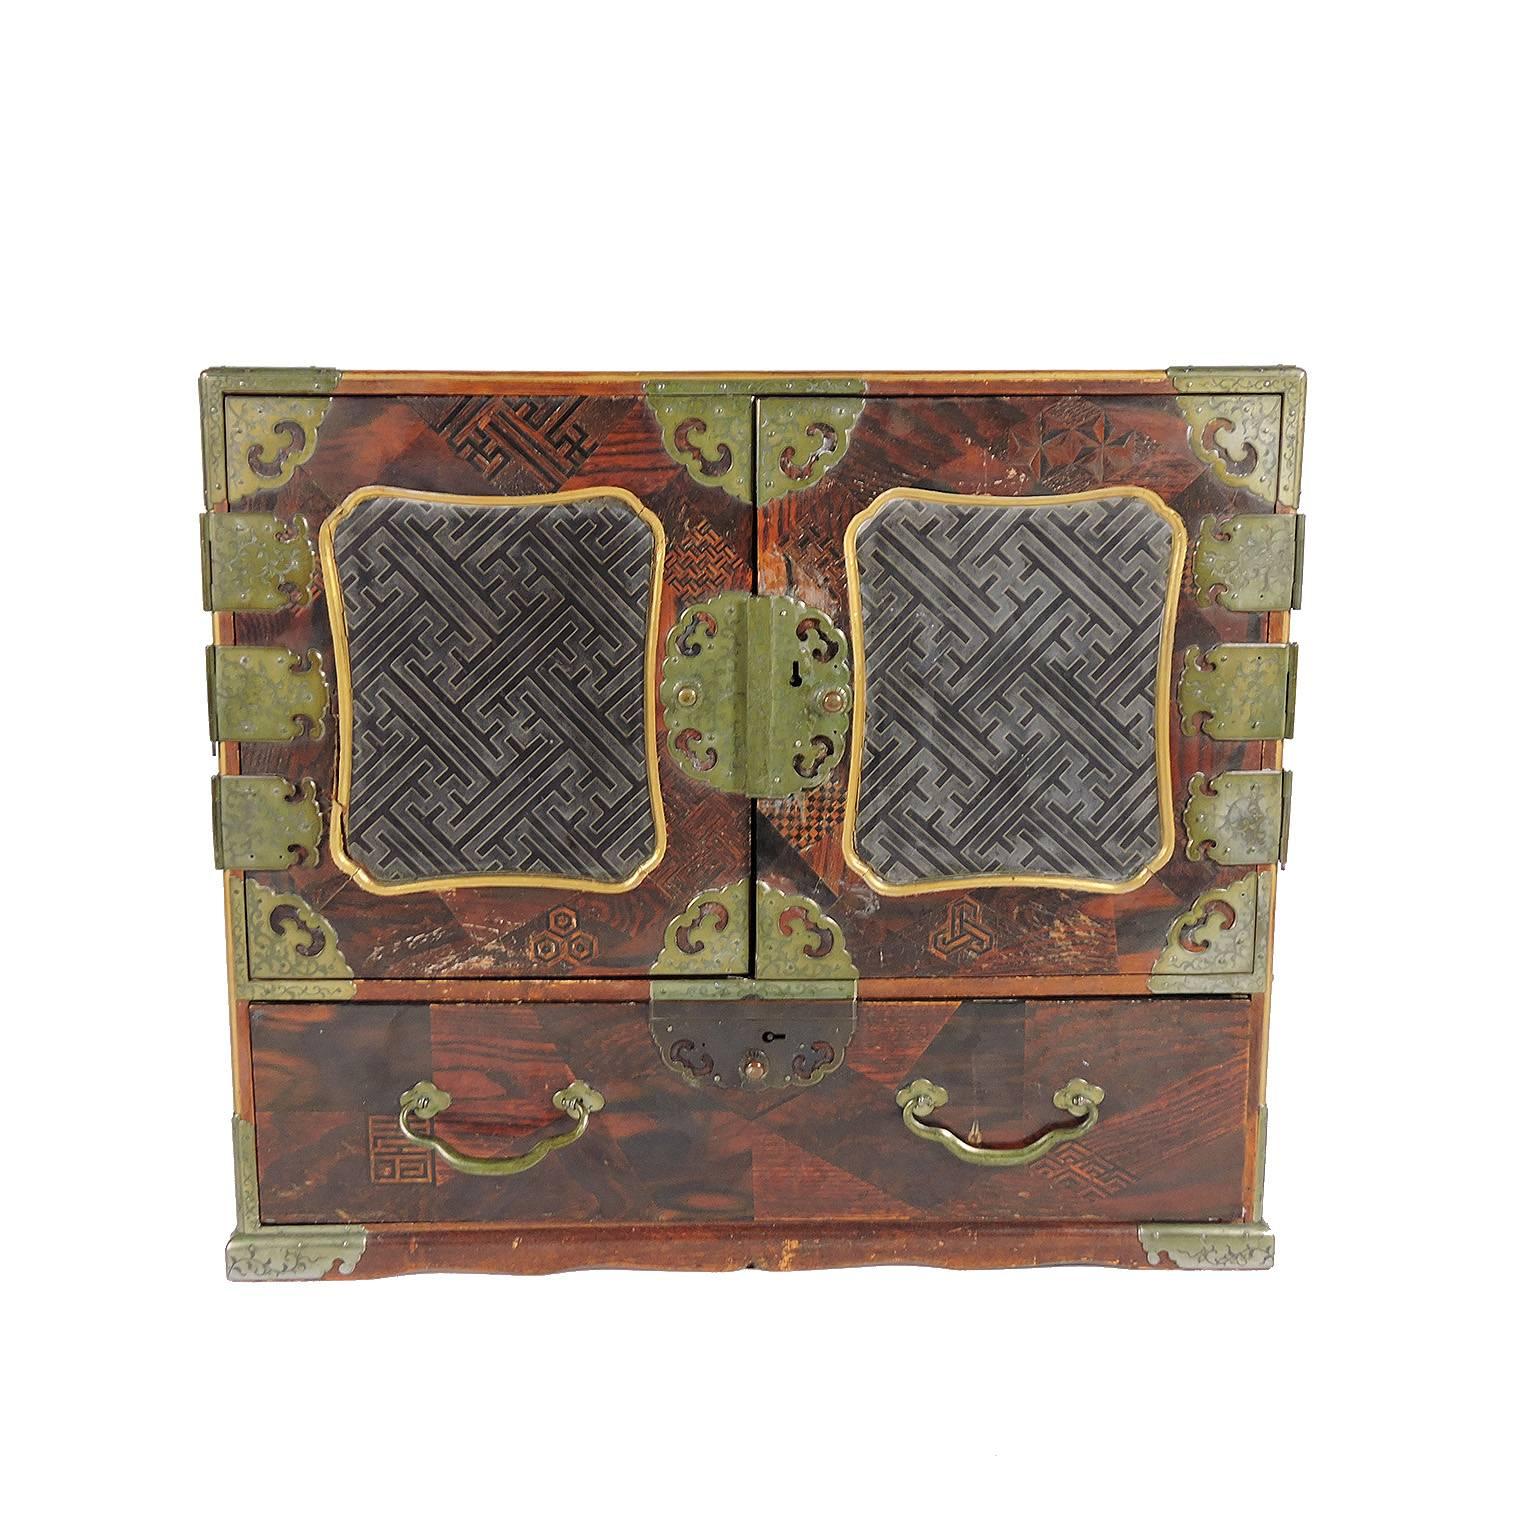 A handsome 19th century Chinese inlaid rosewood and brass bound jewelry chest, with various inlaid designs and handles on each side with inset lacquer geometric design panels. Comprised of a single drawer below two doors opening to reveal a black